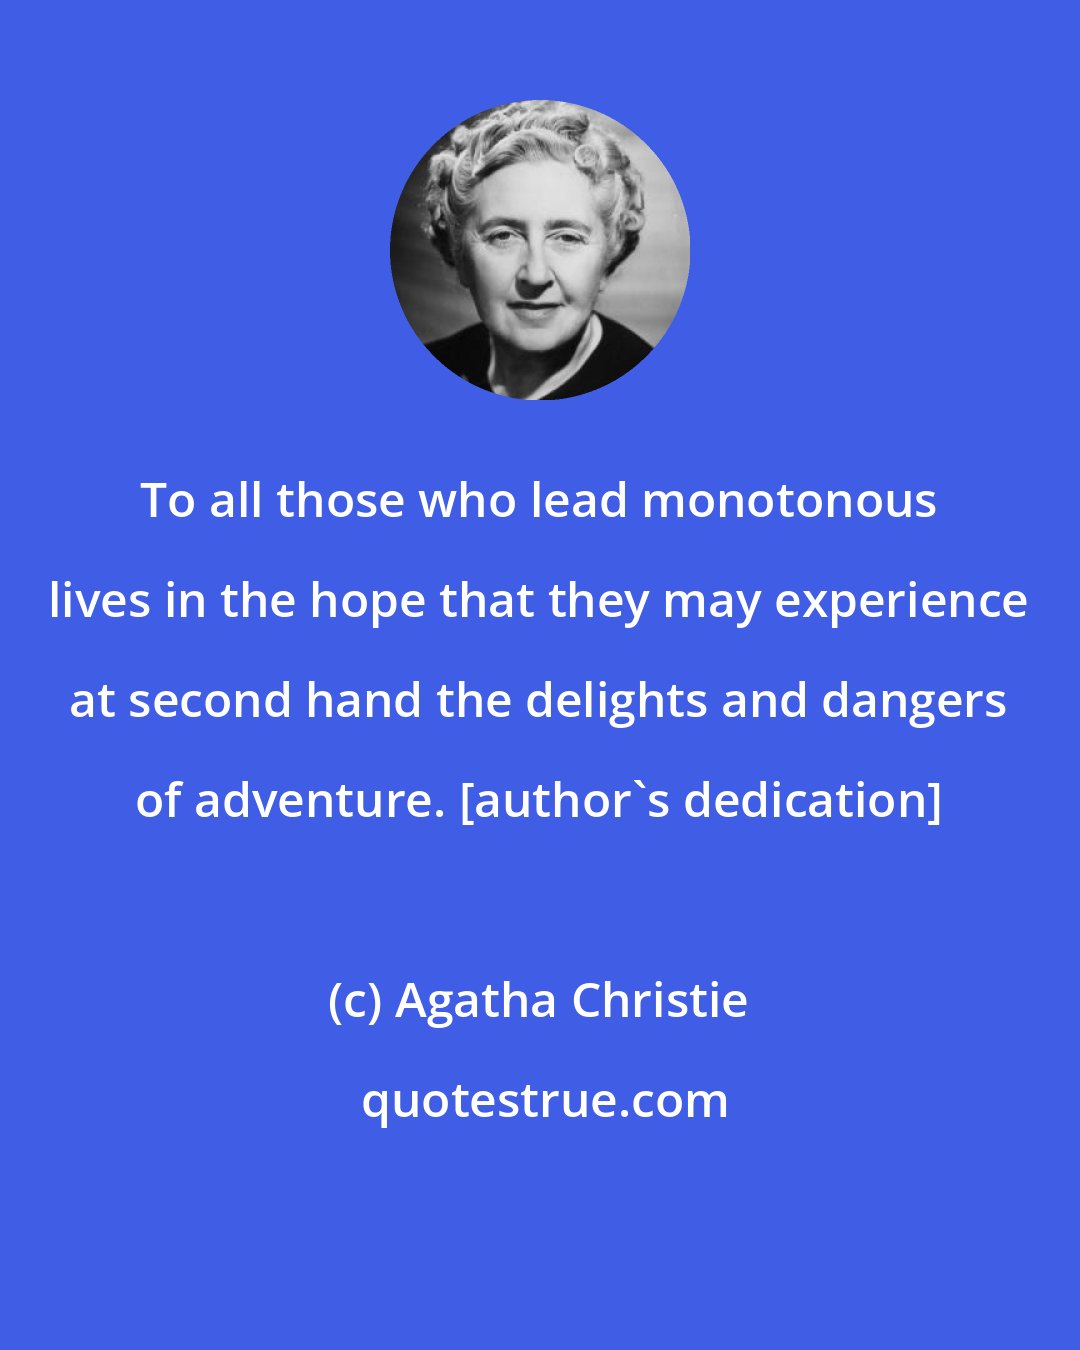 Agatha Christie: To all those who lead monotonous lives in the hope that they may experience at second hand the delights and dangers of adventure. [author's dedication]